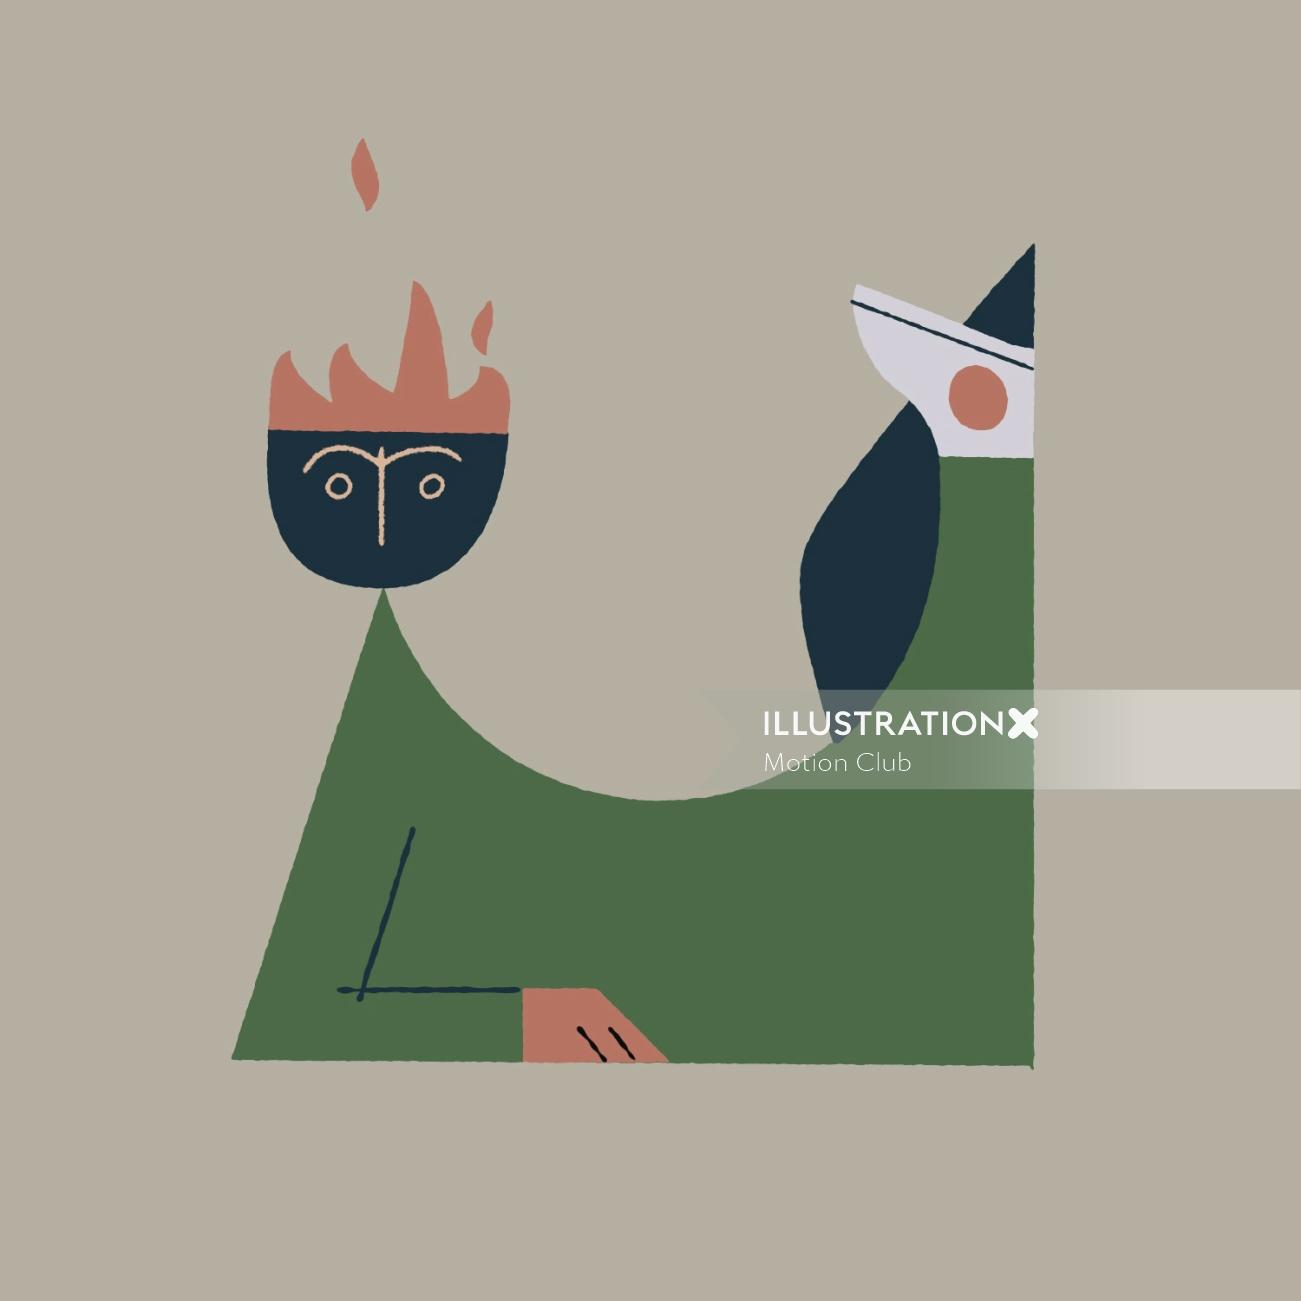 Playful character inspired by mid-century styles
